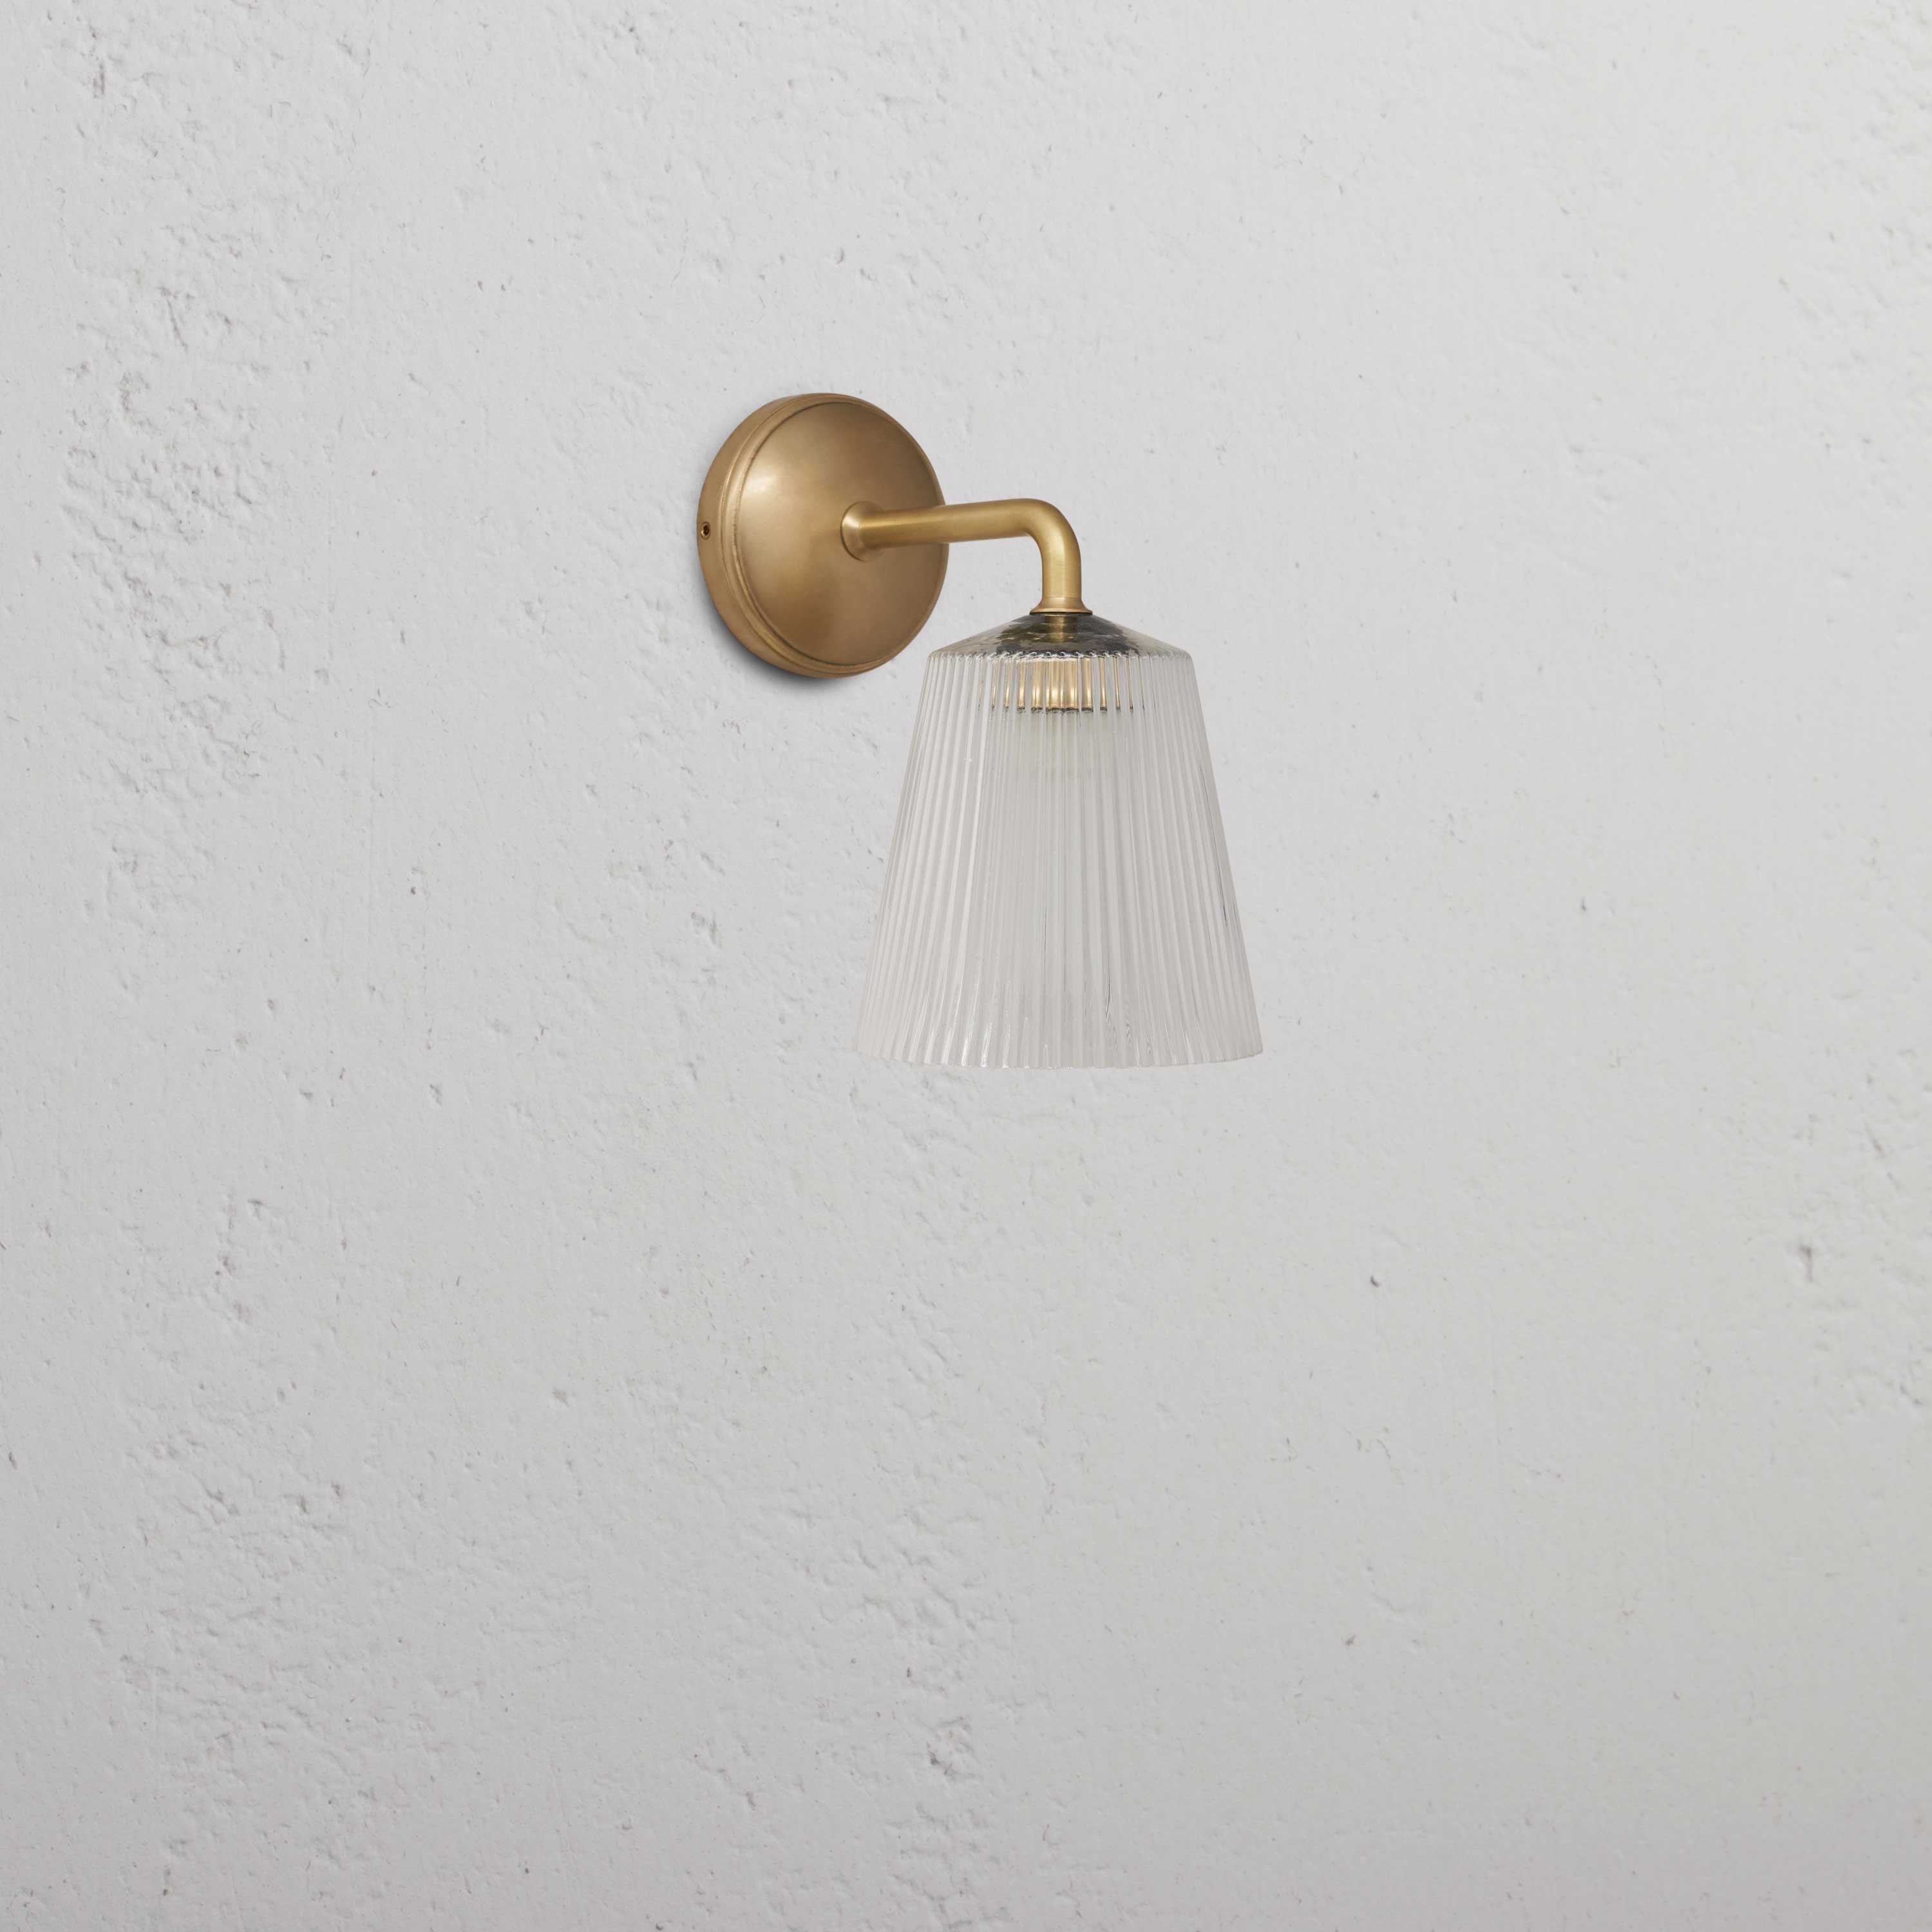 Wall Light Fluted Glass - Antique Brass on The Wall